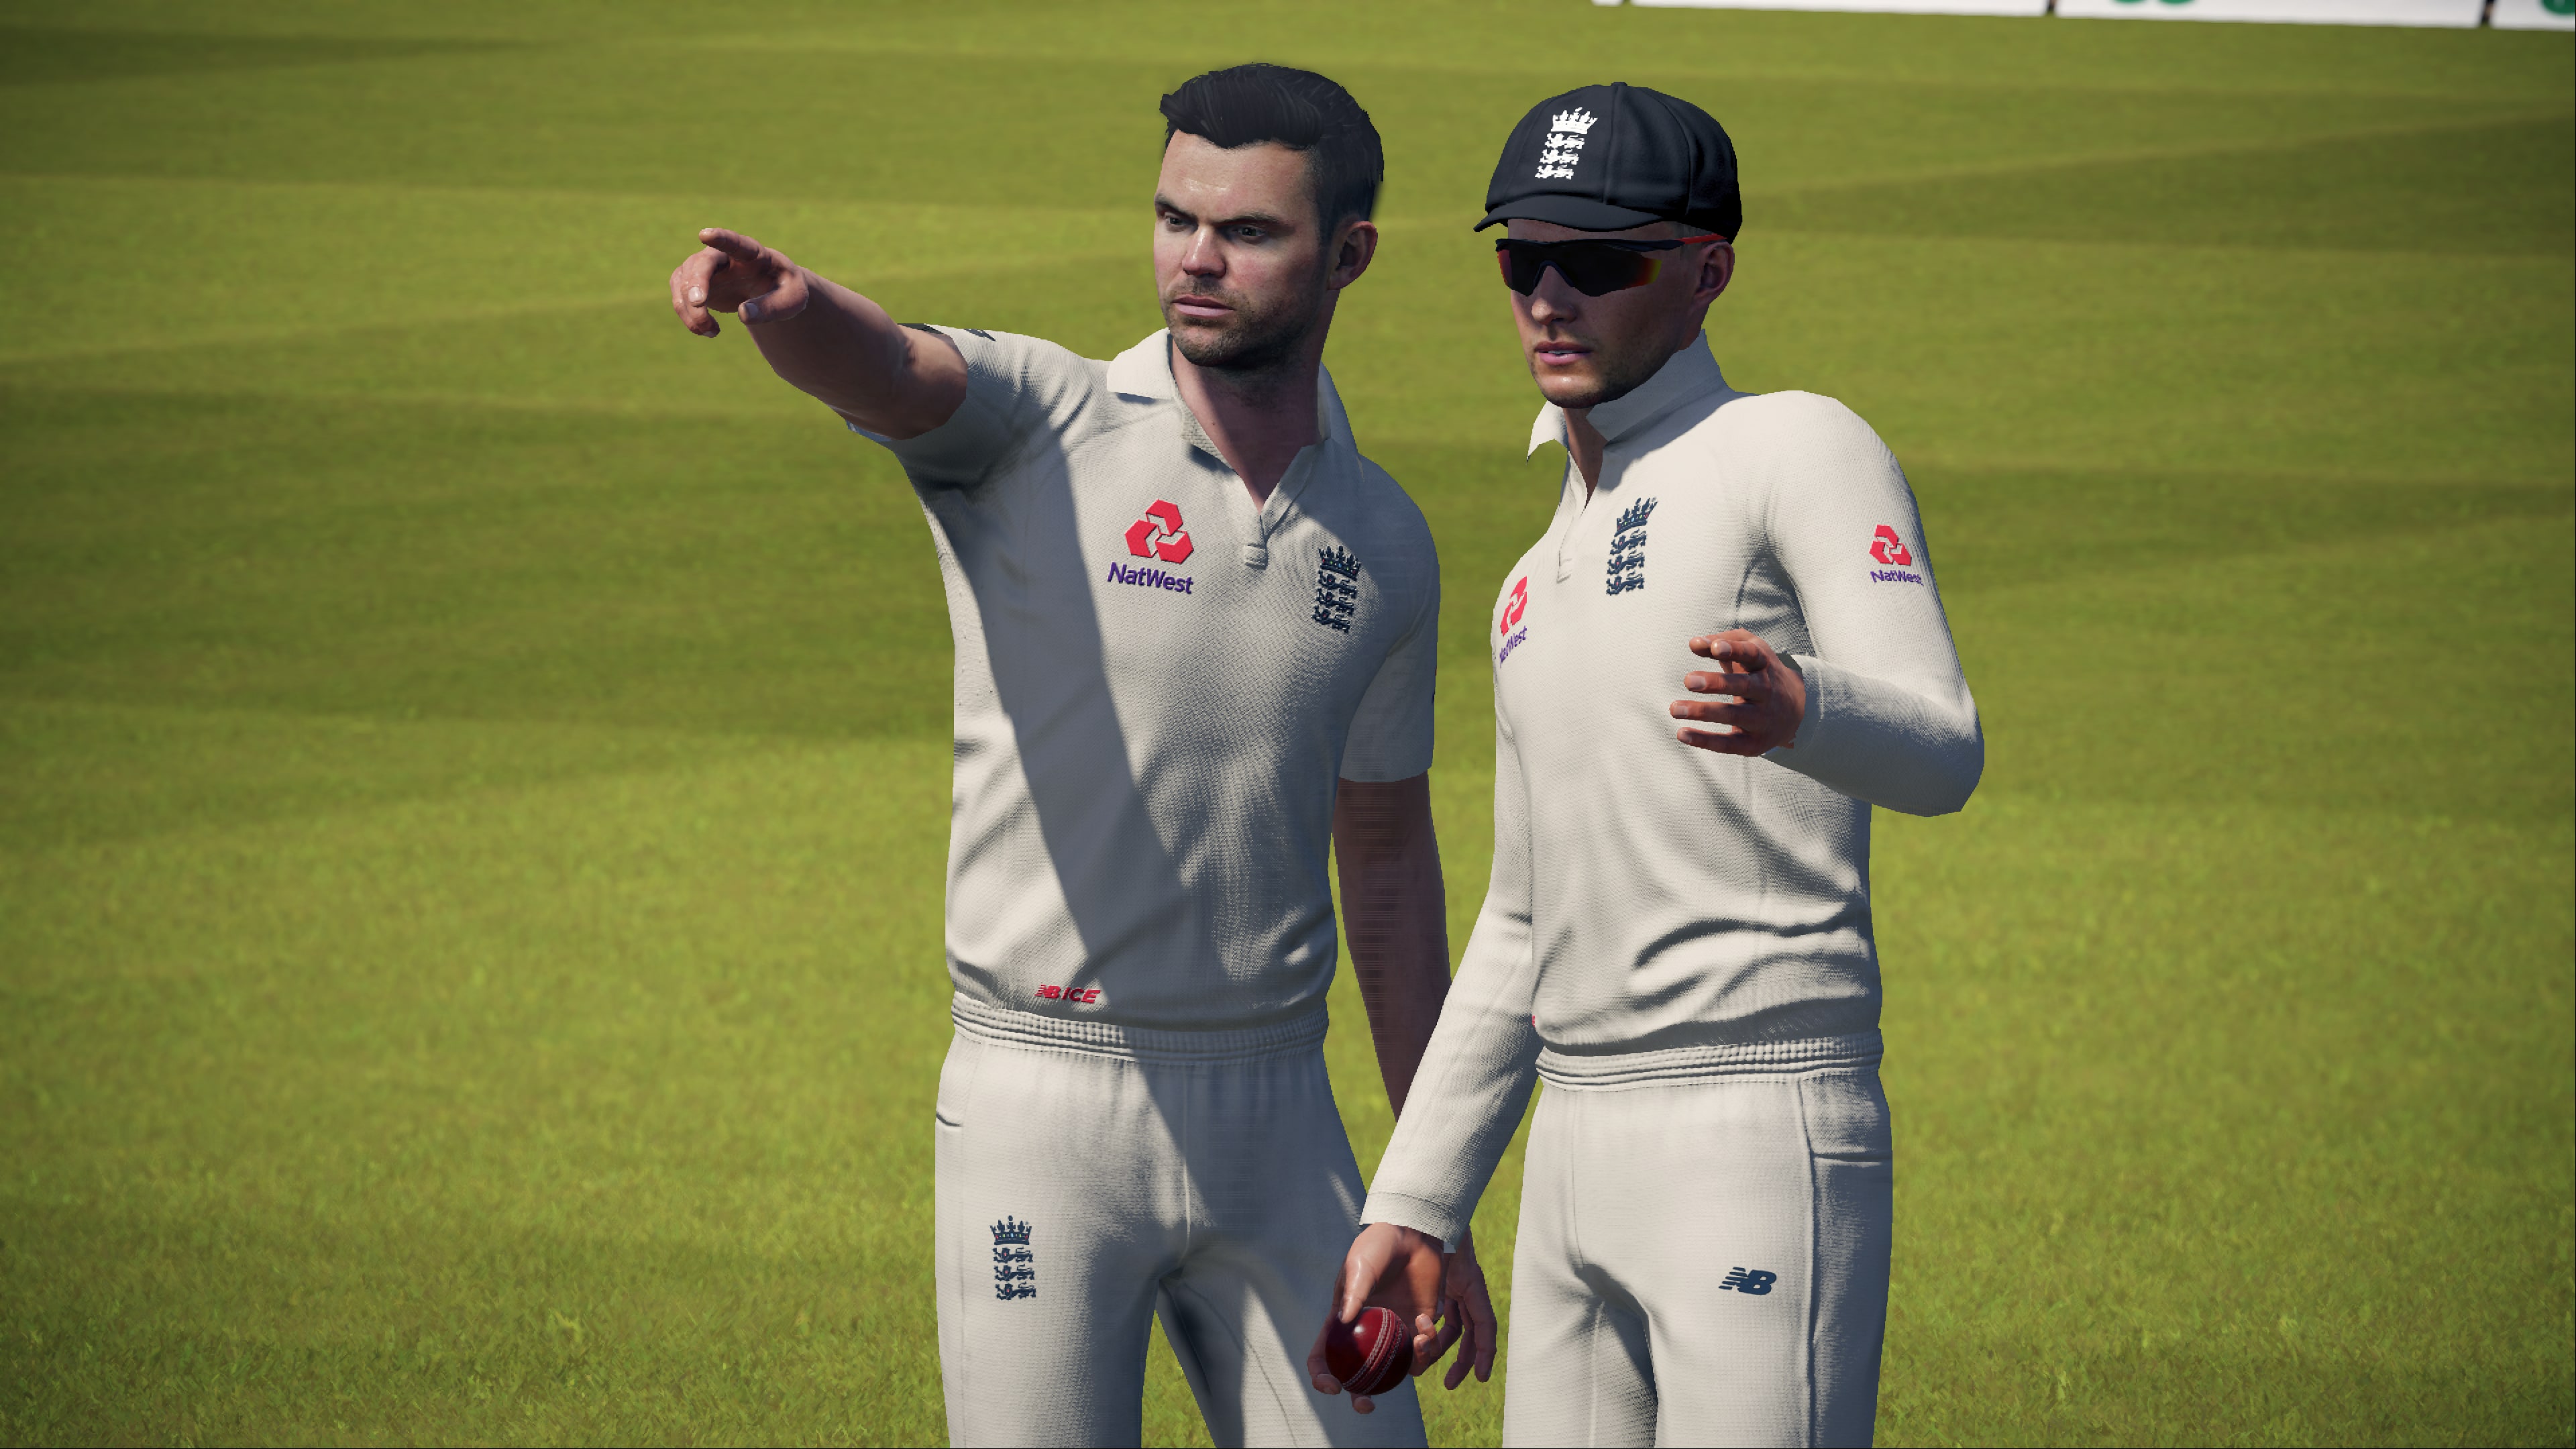 cricket 19 ps4 cheapest price